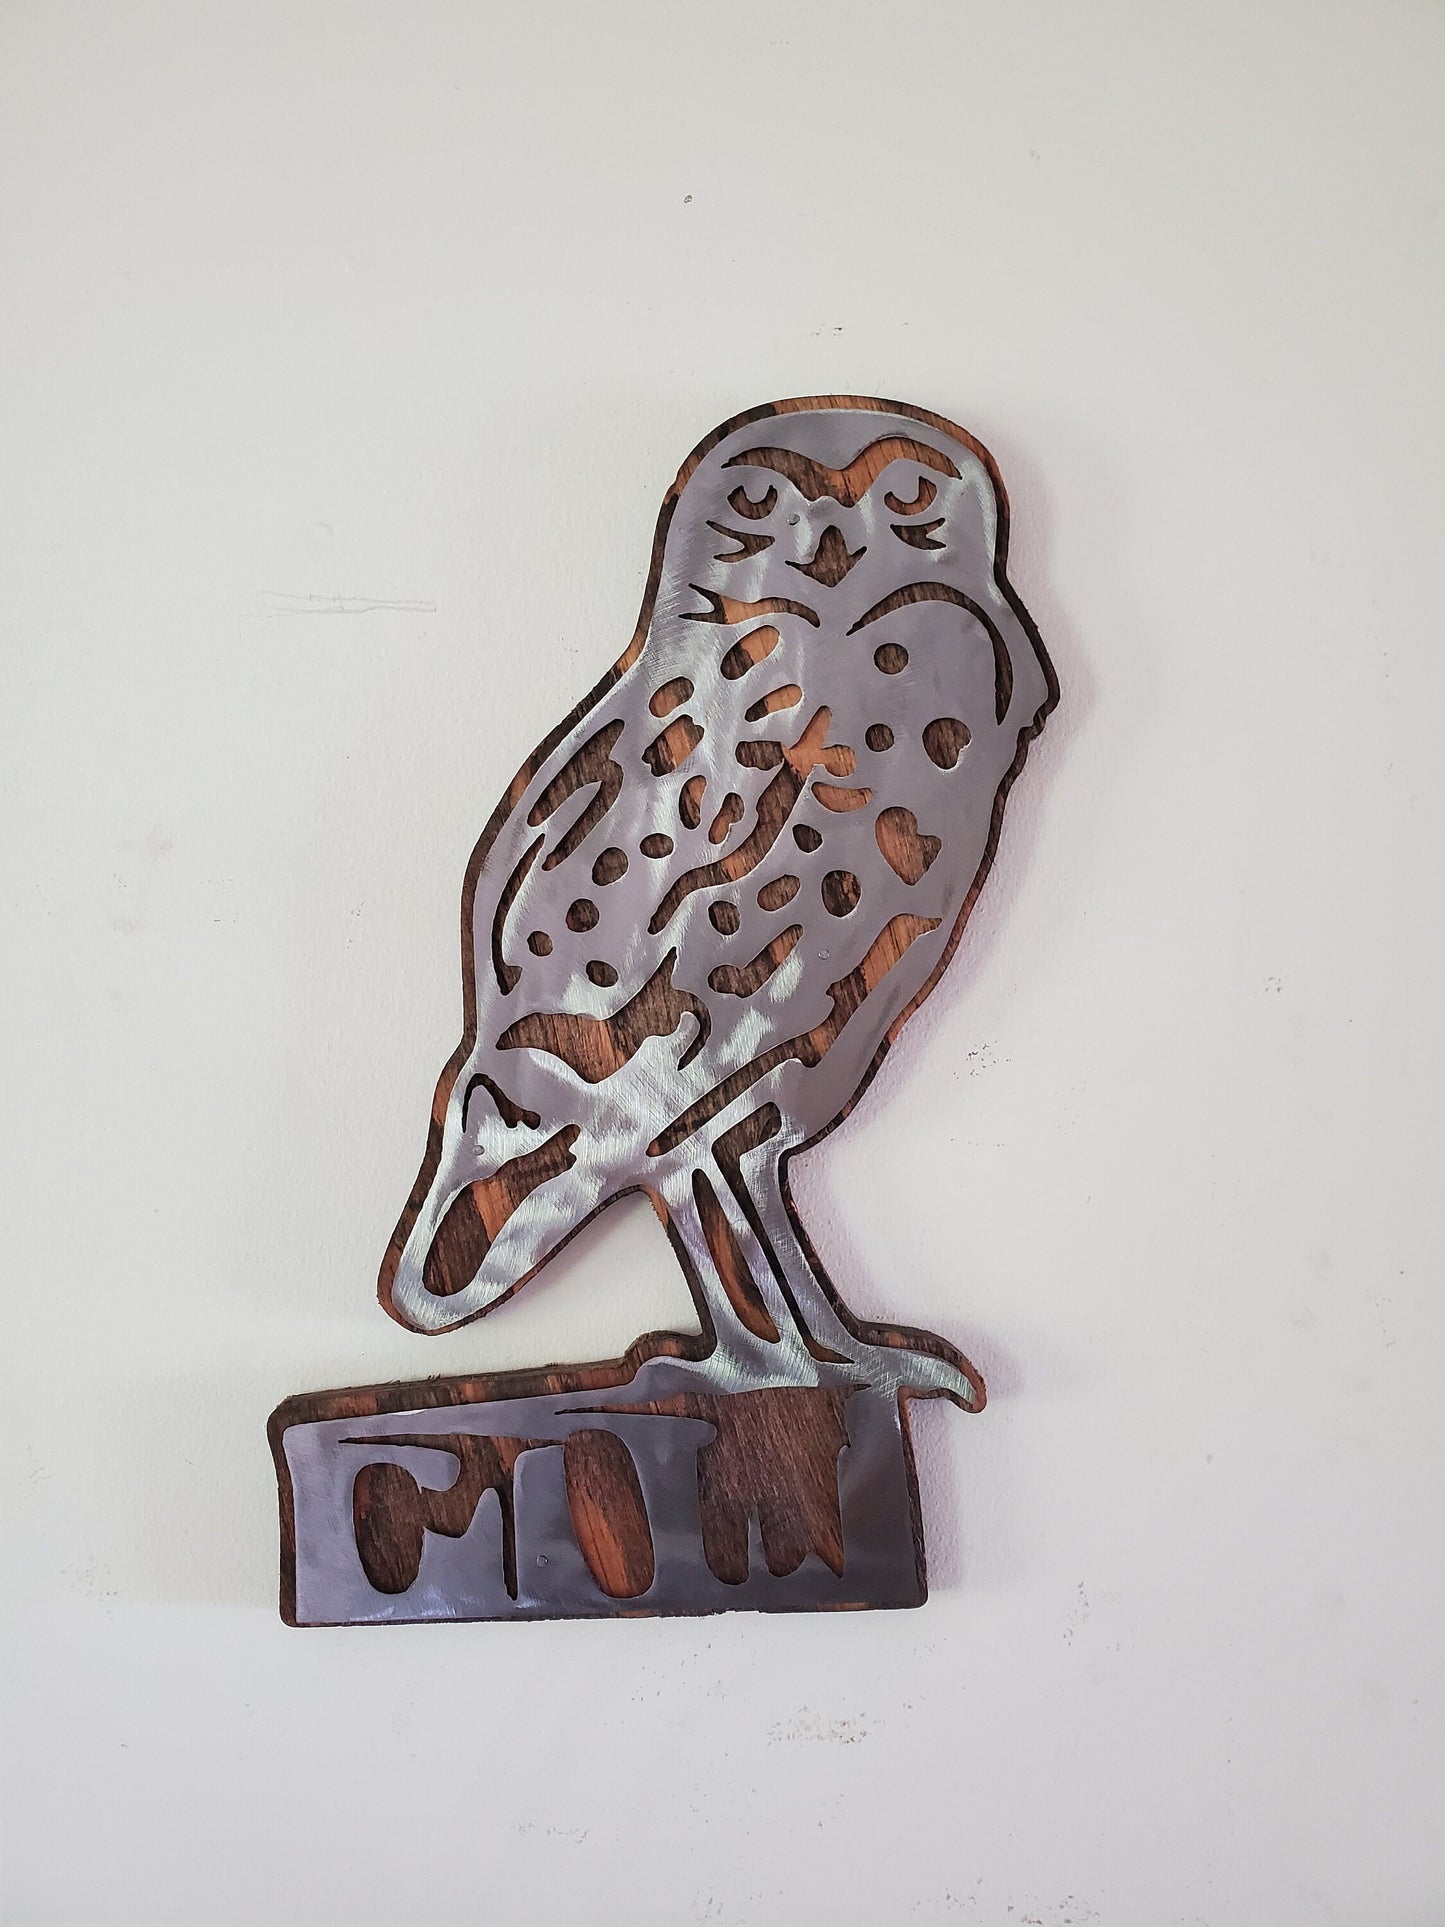 Owl Metal Art on Distressed Wood Background - Whimsical and Rustic Home Decor Piece